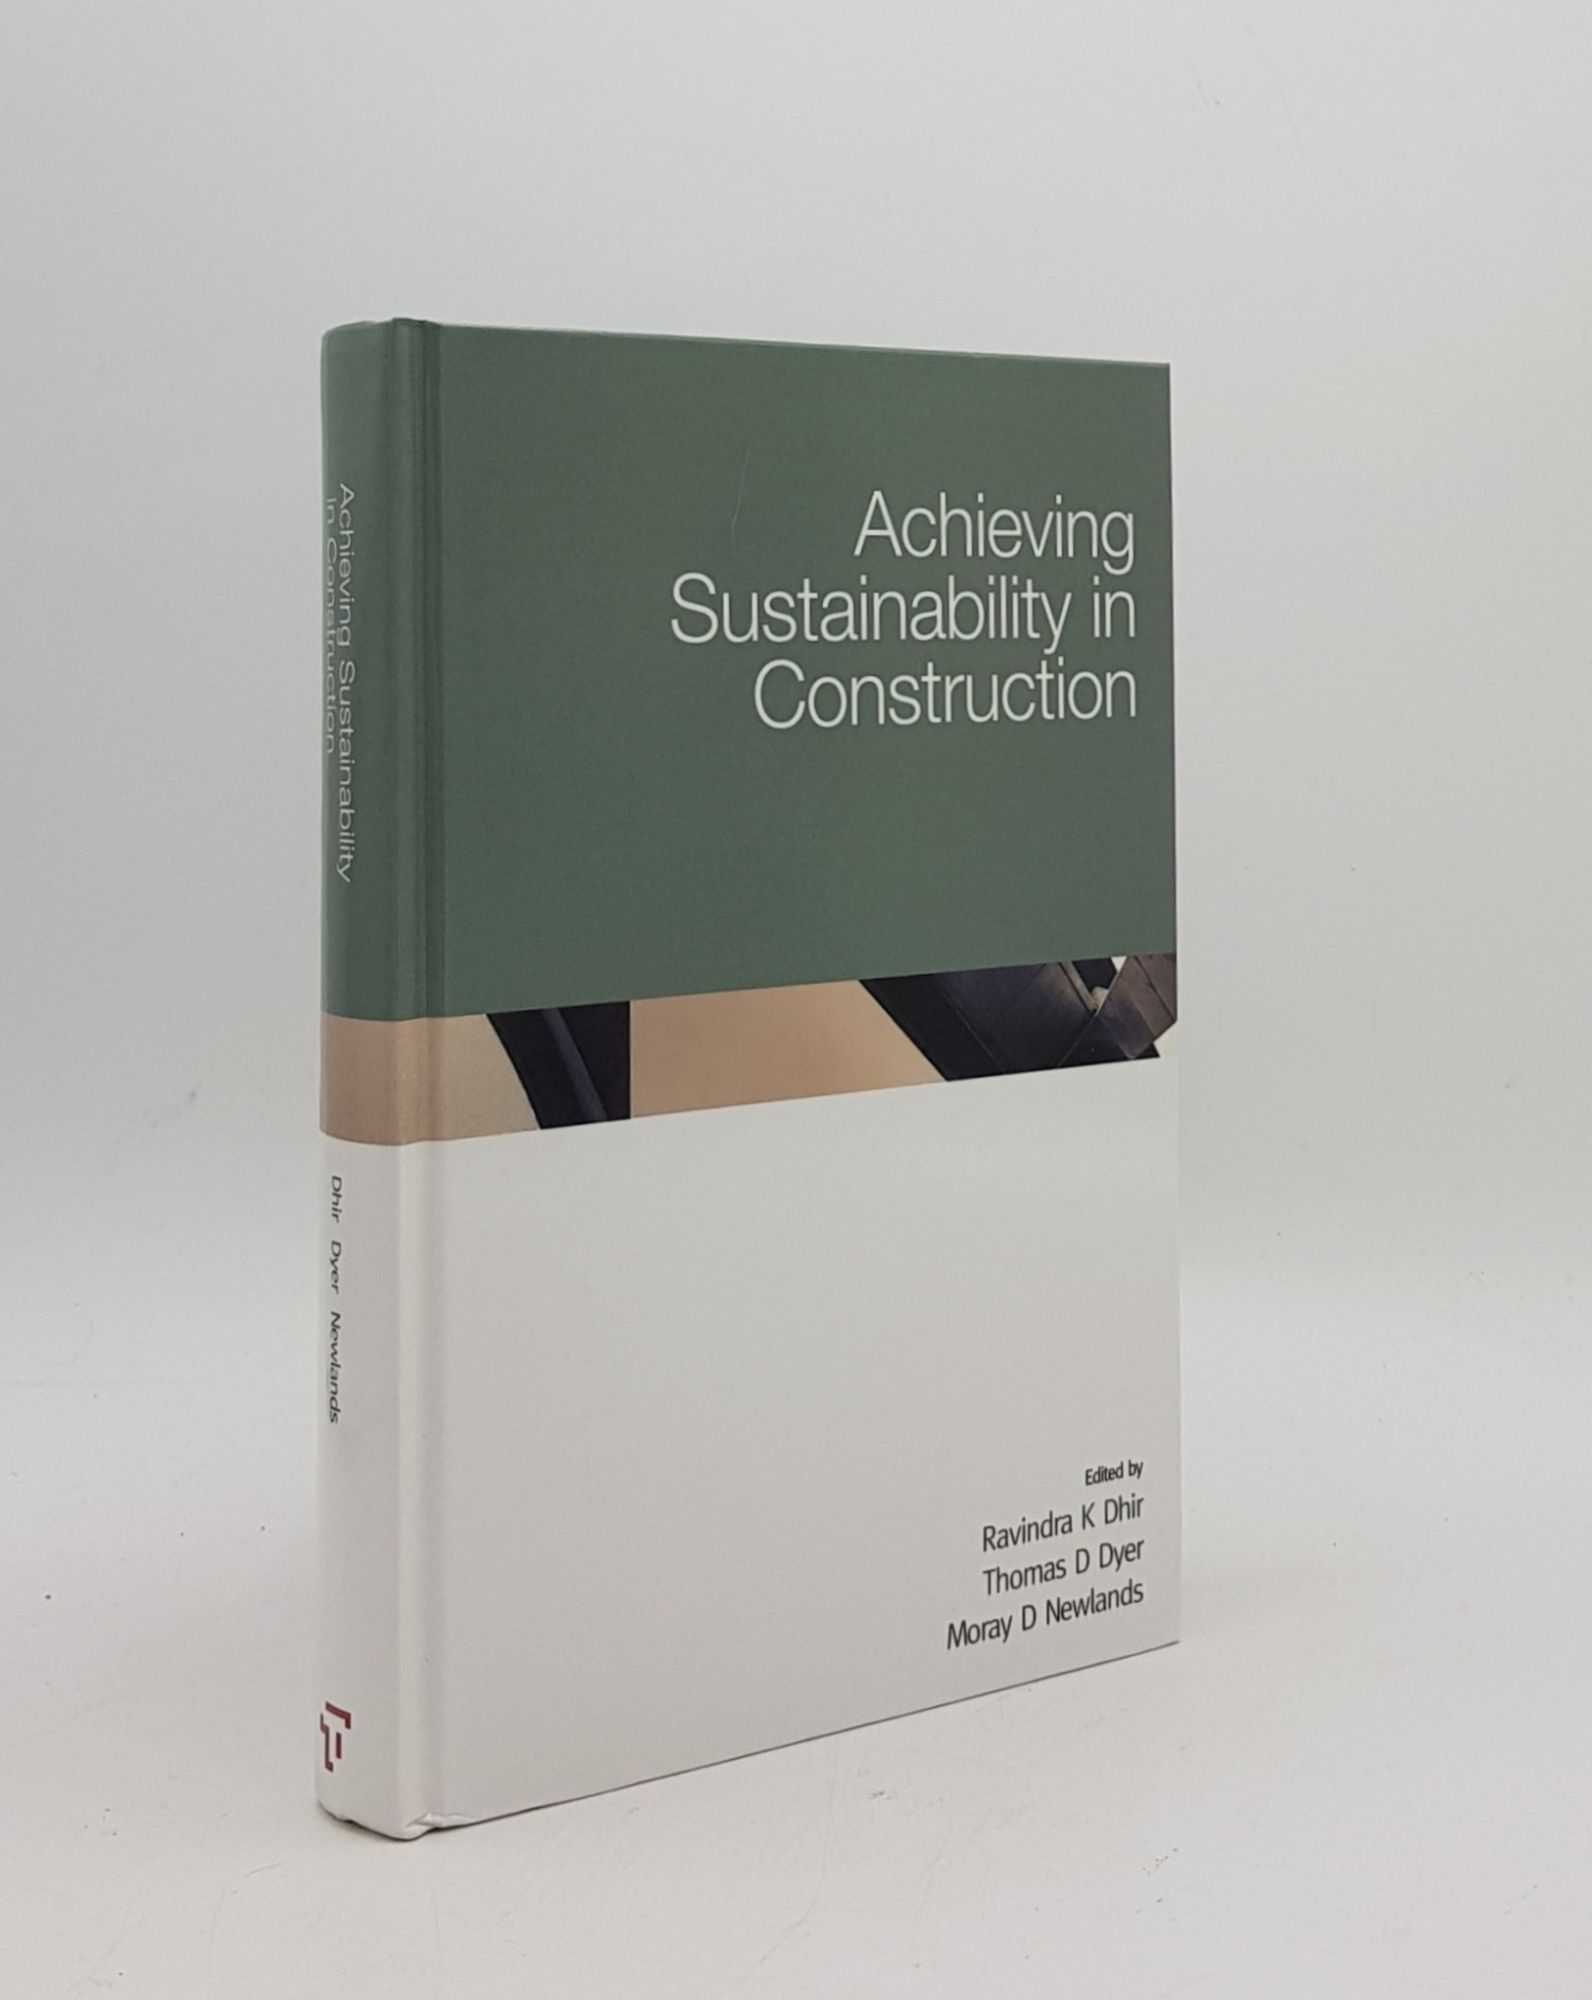 ACHIEVING SUSTAINABILITY IN CONSTRUCTION Proceedings of the International Conference Dundee July 2005 - DHIR Ravindra K., DYER Thomas D., NEWLANDS Moray D.